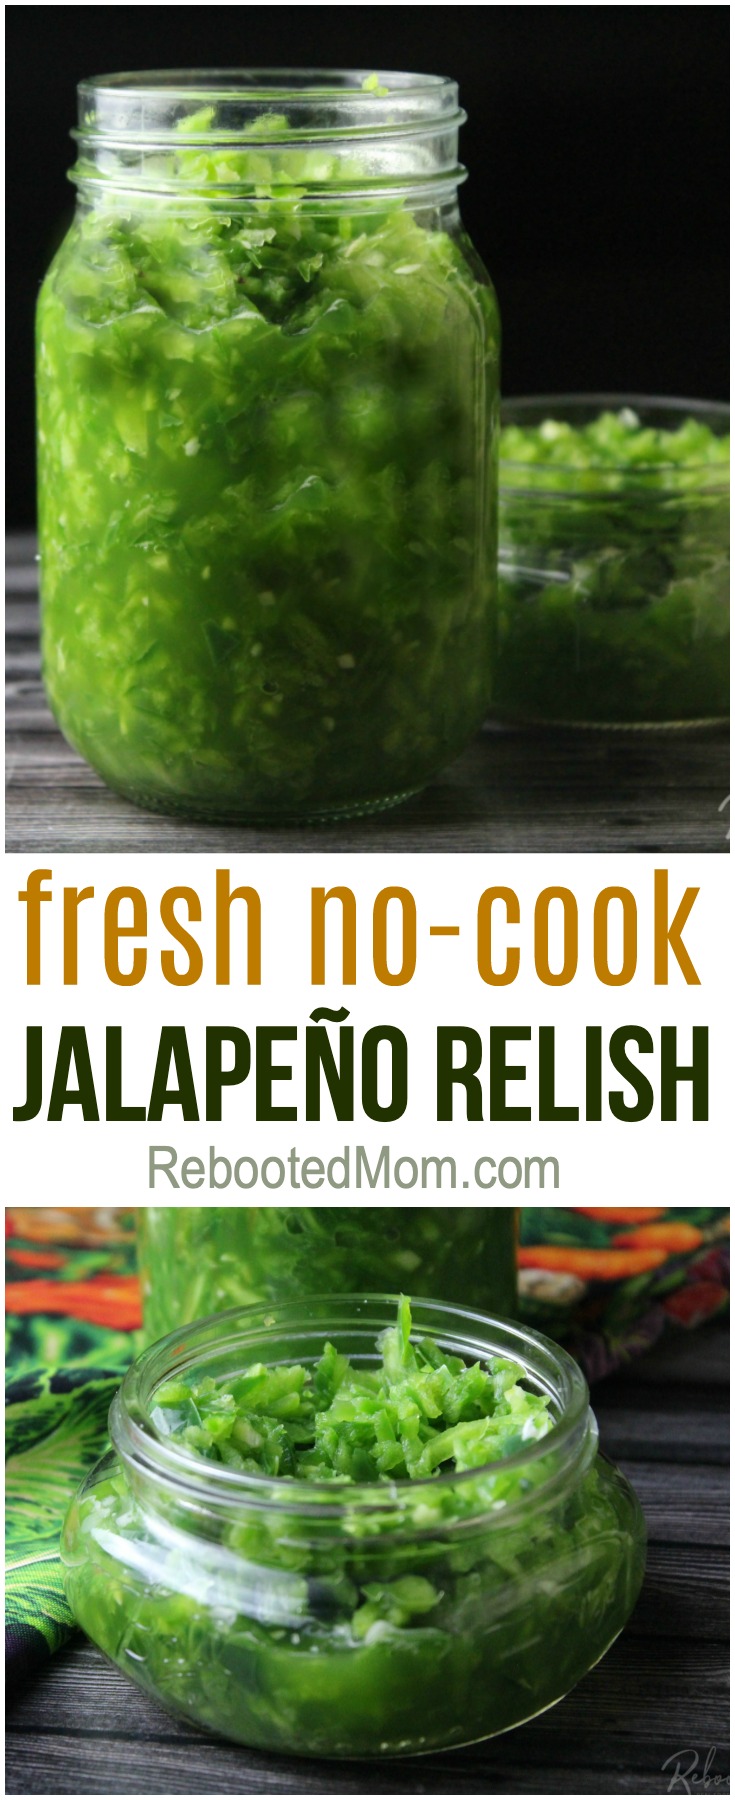 This fresh jalapeño relish is easy to make with simple ingredients that result in an explosion of flavor! It's great on burgers, eggs, tacos and more!  #relish #jalapeno #nocook #canning